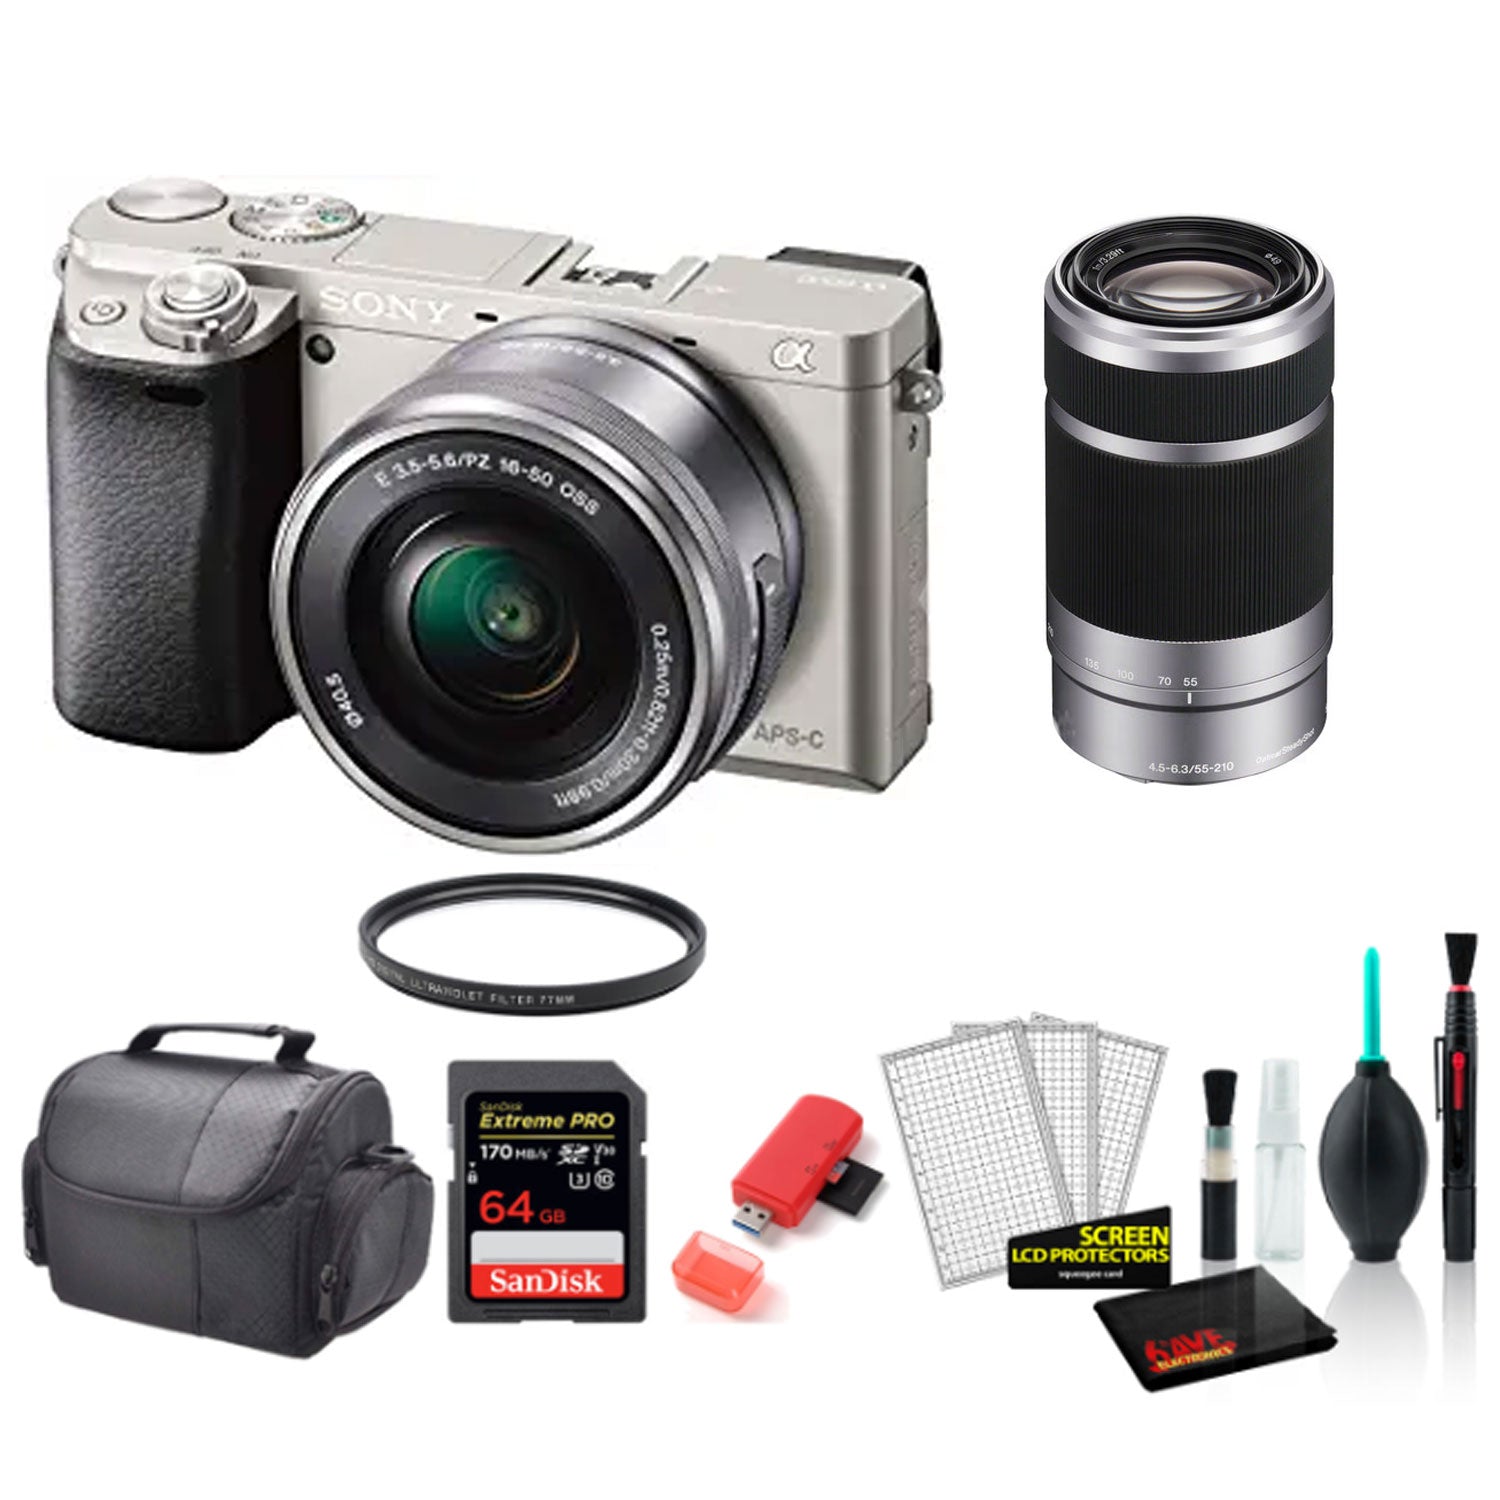 Sony Alpha a6000 Mirrorless Digital Camera with 16-50mm + 55-210mm Lenses (SILVER) with 64GB Memory Card -International Model Bundle